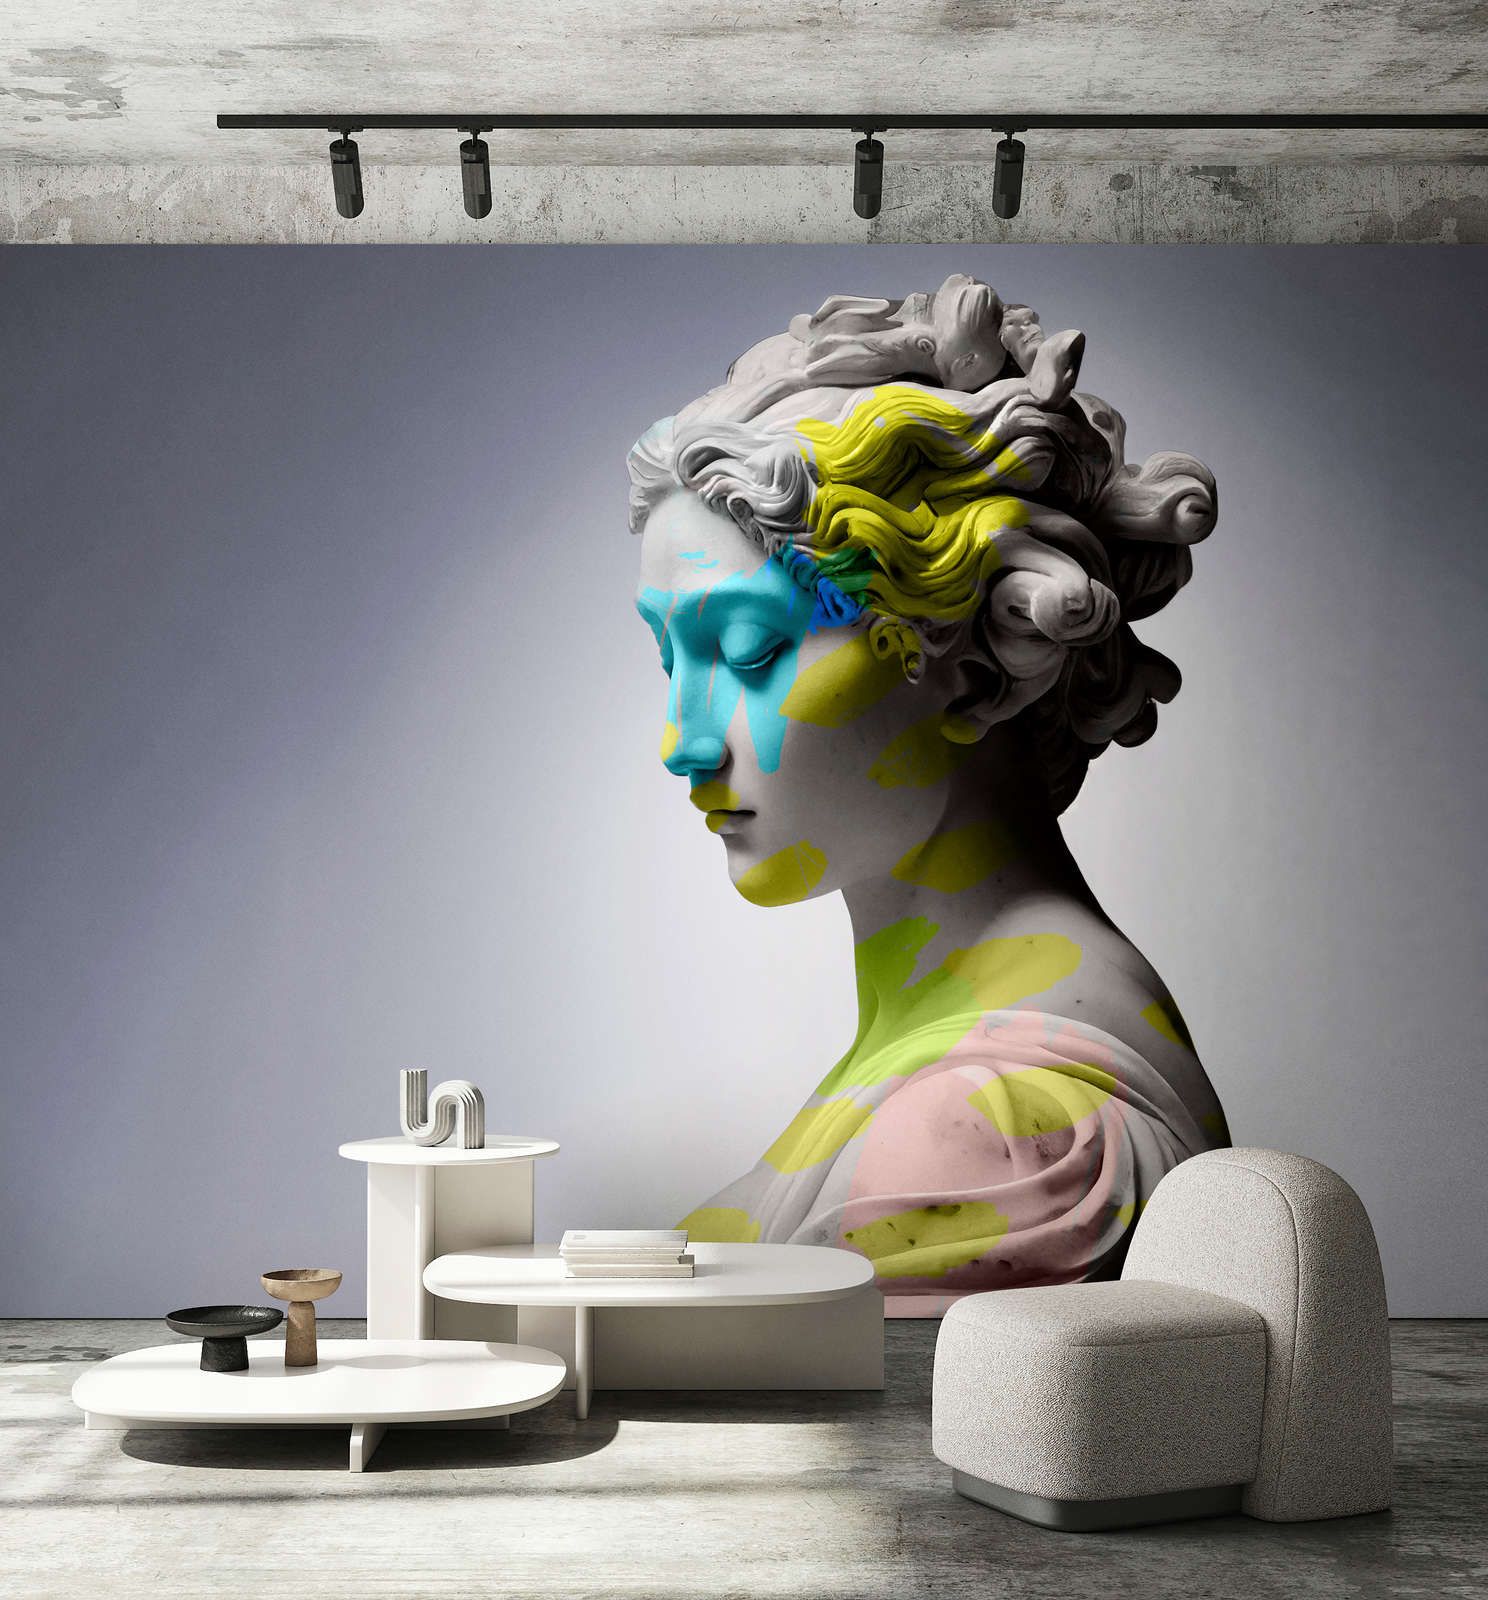             Photo wallpaper »clio« - female sculpture with colourful accents - Smooth, slightly pearlescent non-woven fabric
        